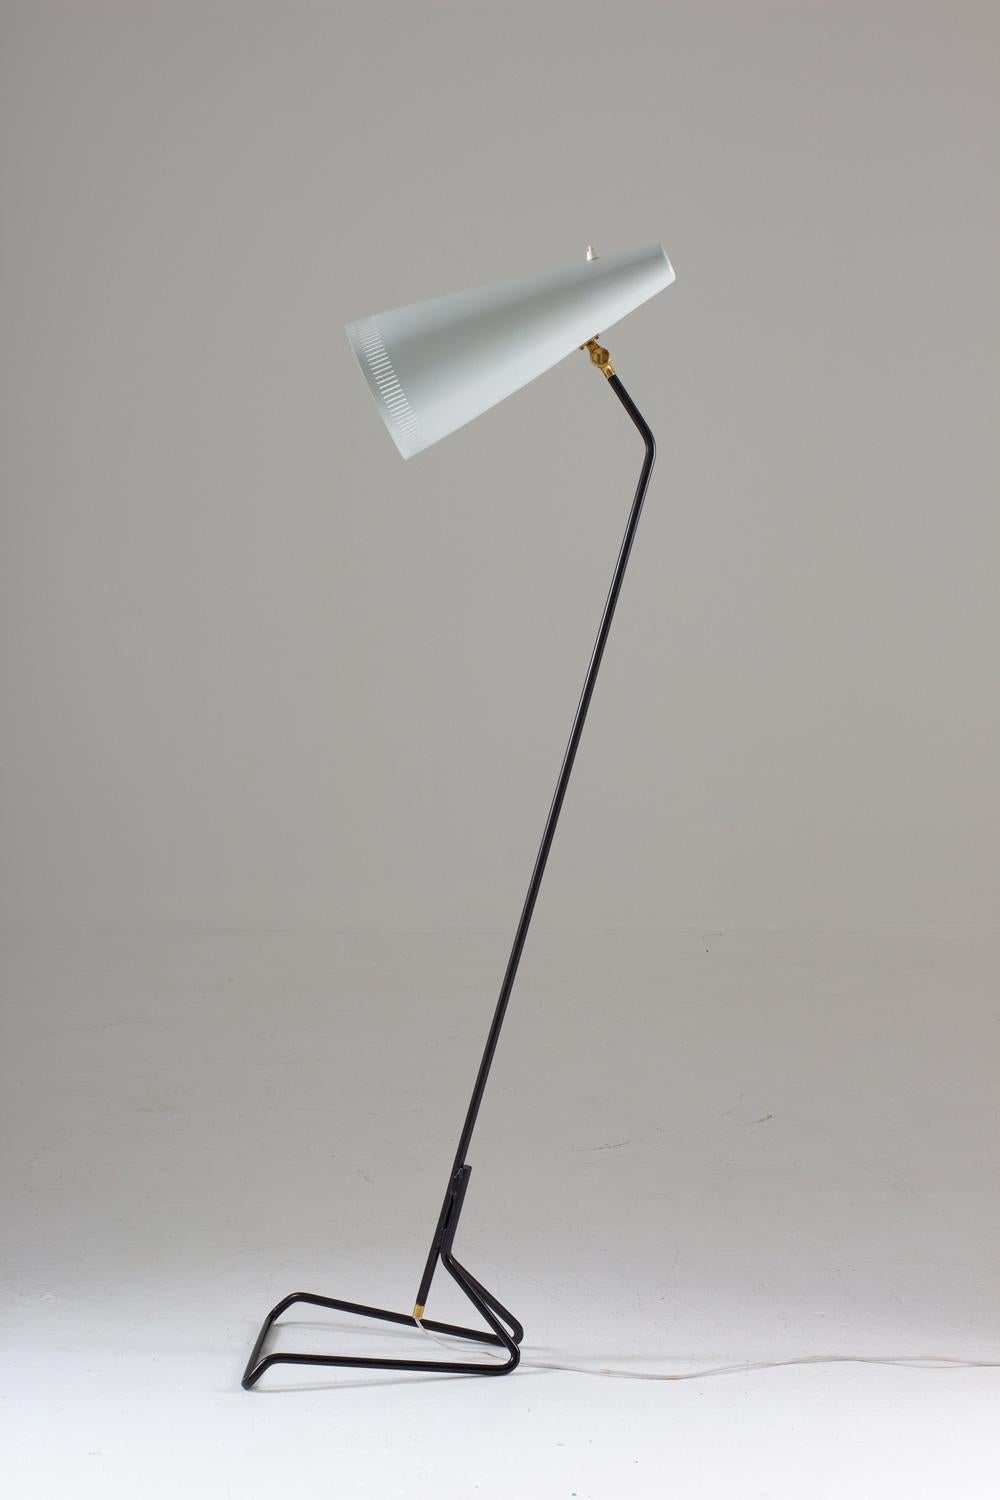 Very rare floor lamp produced in Sweden, 1950s.
This spectacular designed lamp consists of a metal stand, supporting a large perforated metal shade (measures 41cm / 16